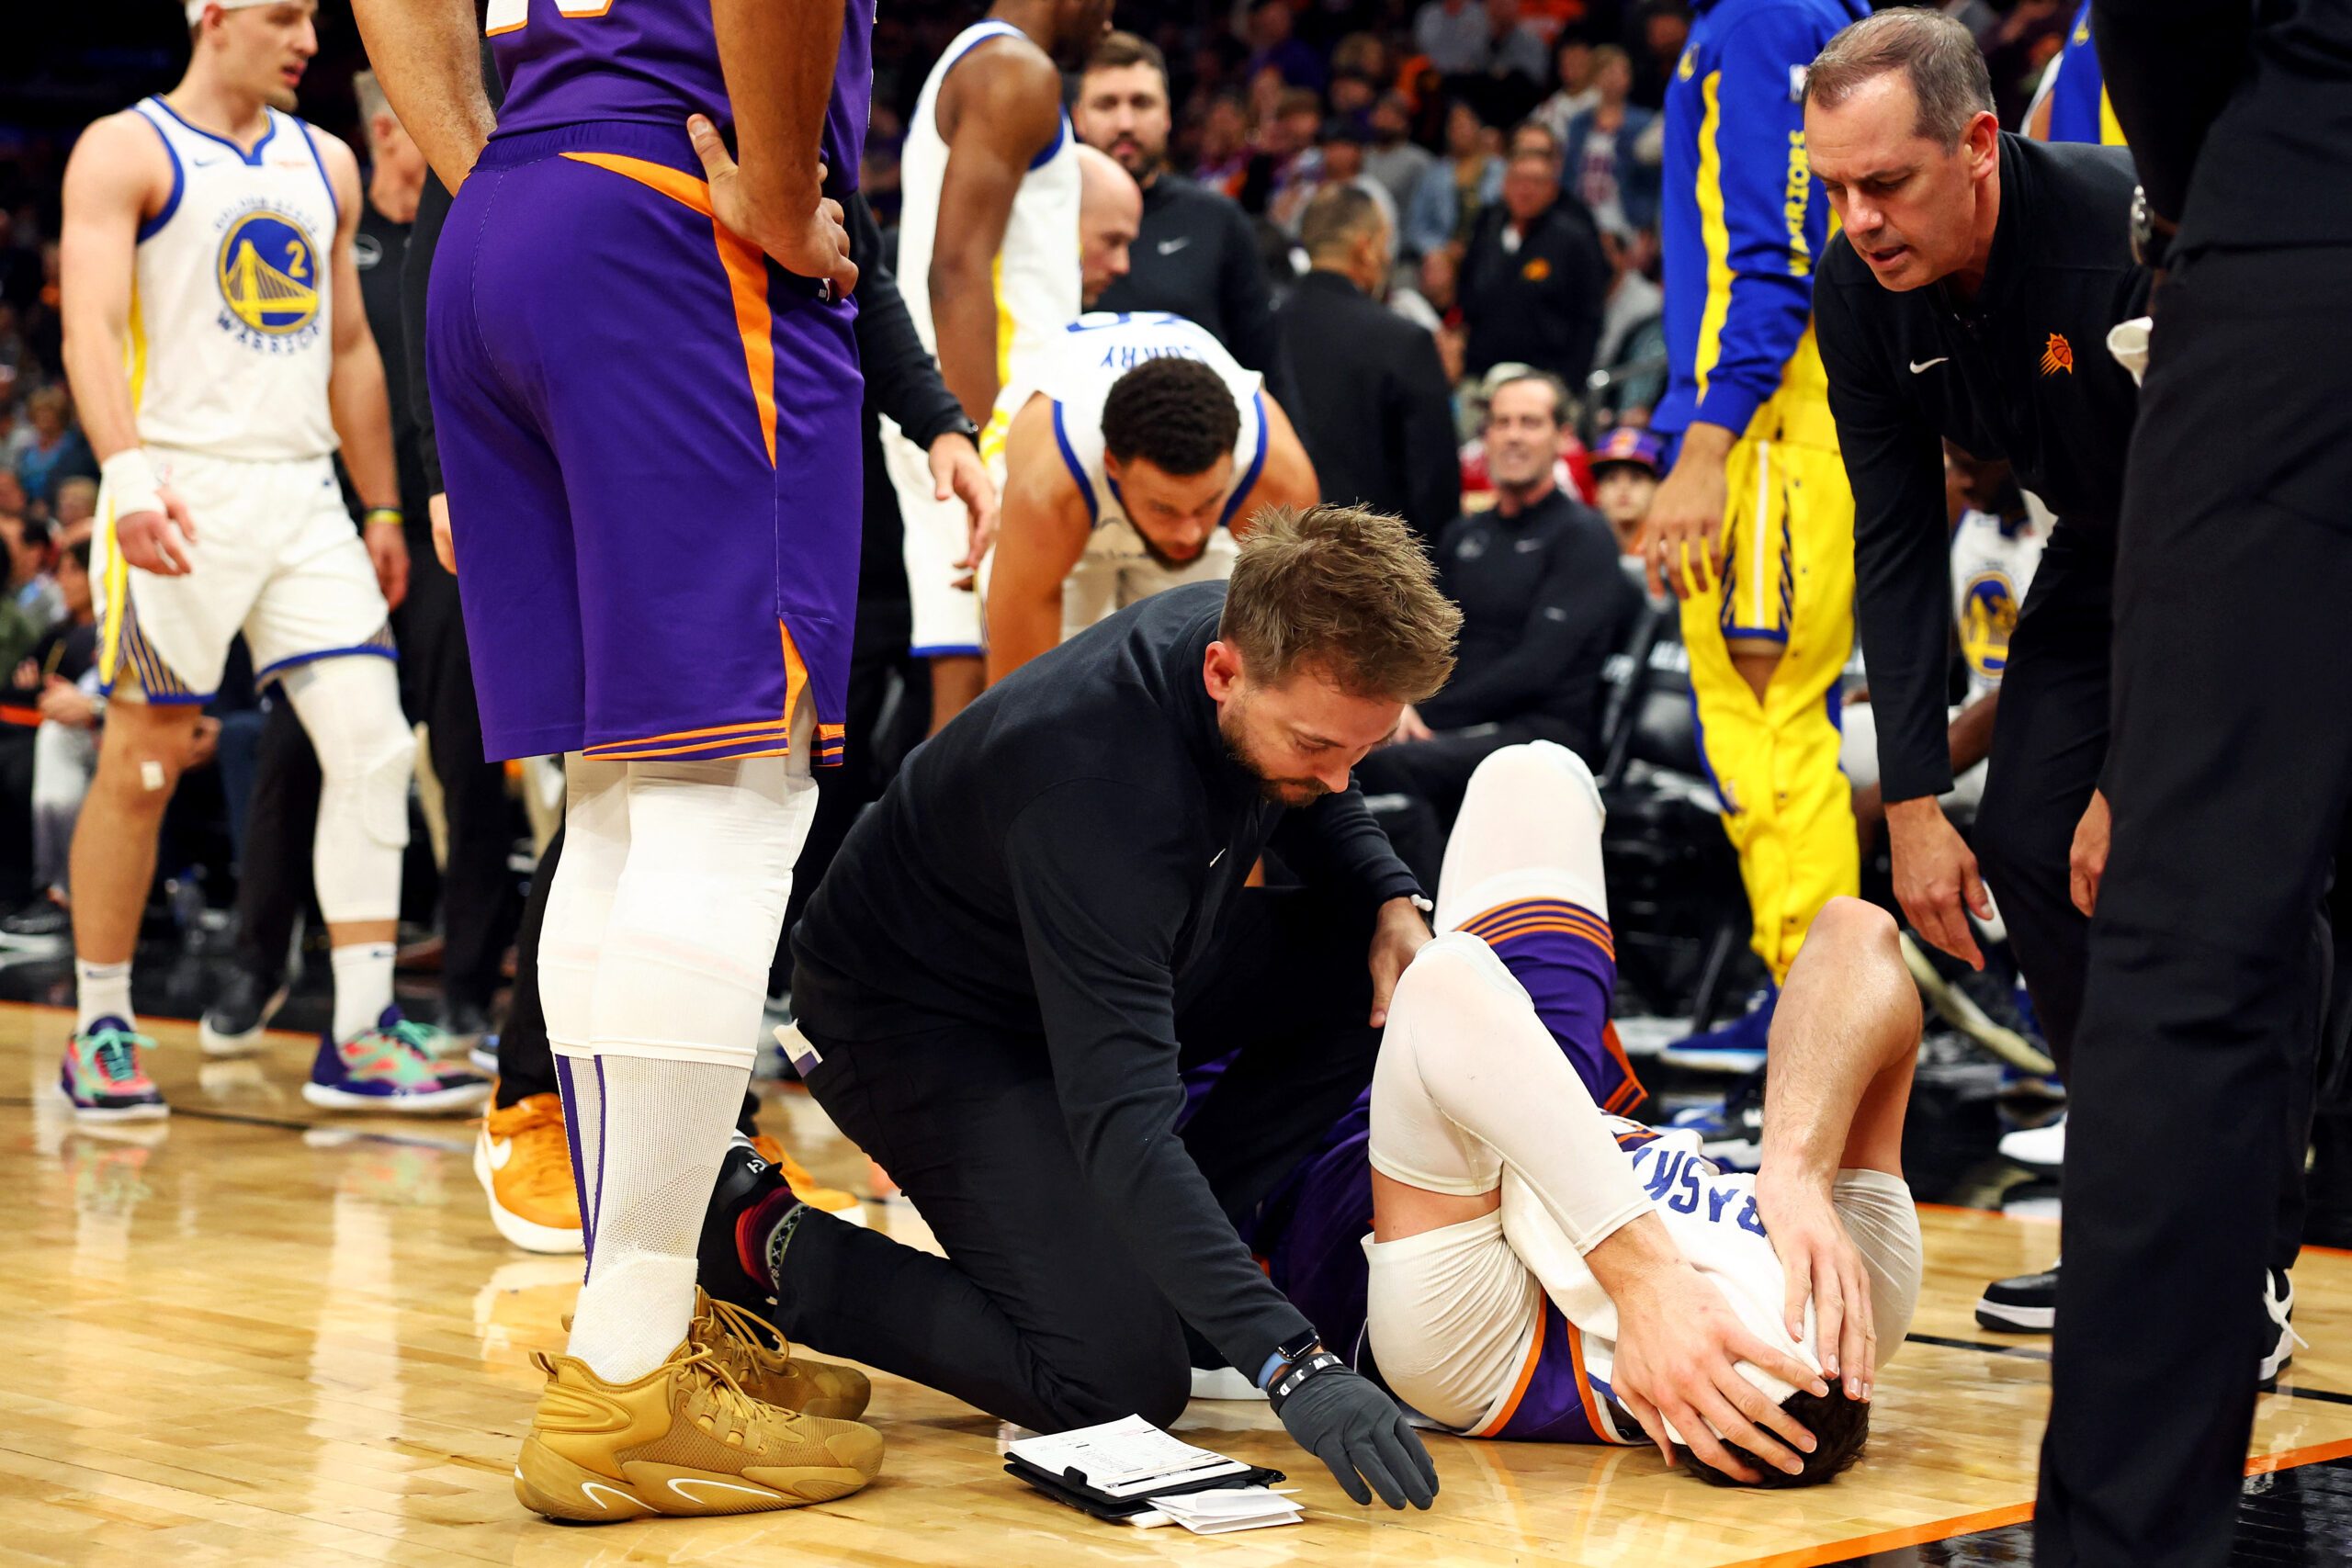 Draymond Green ejected for smacking Jusuf Nurkic as Suns hold off Warriors